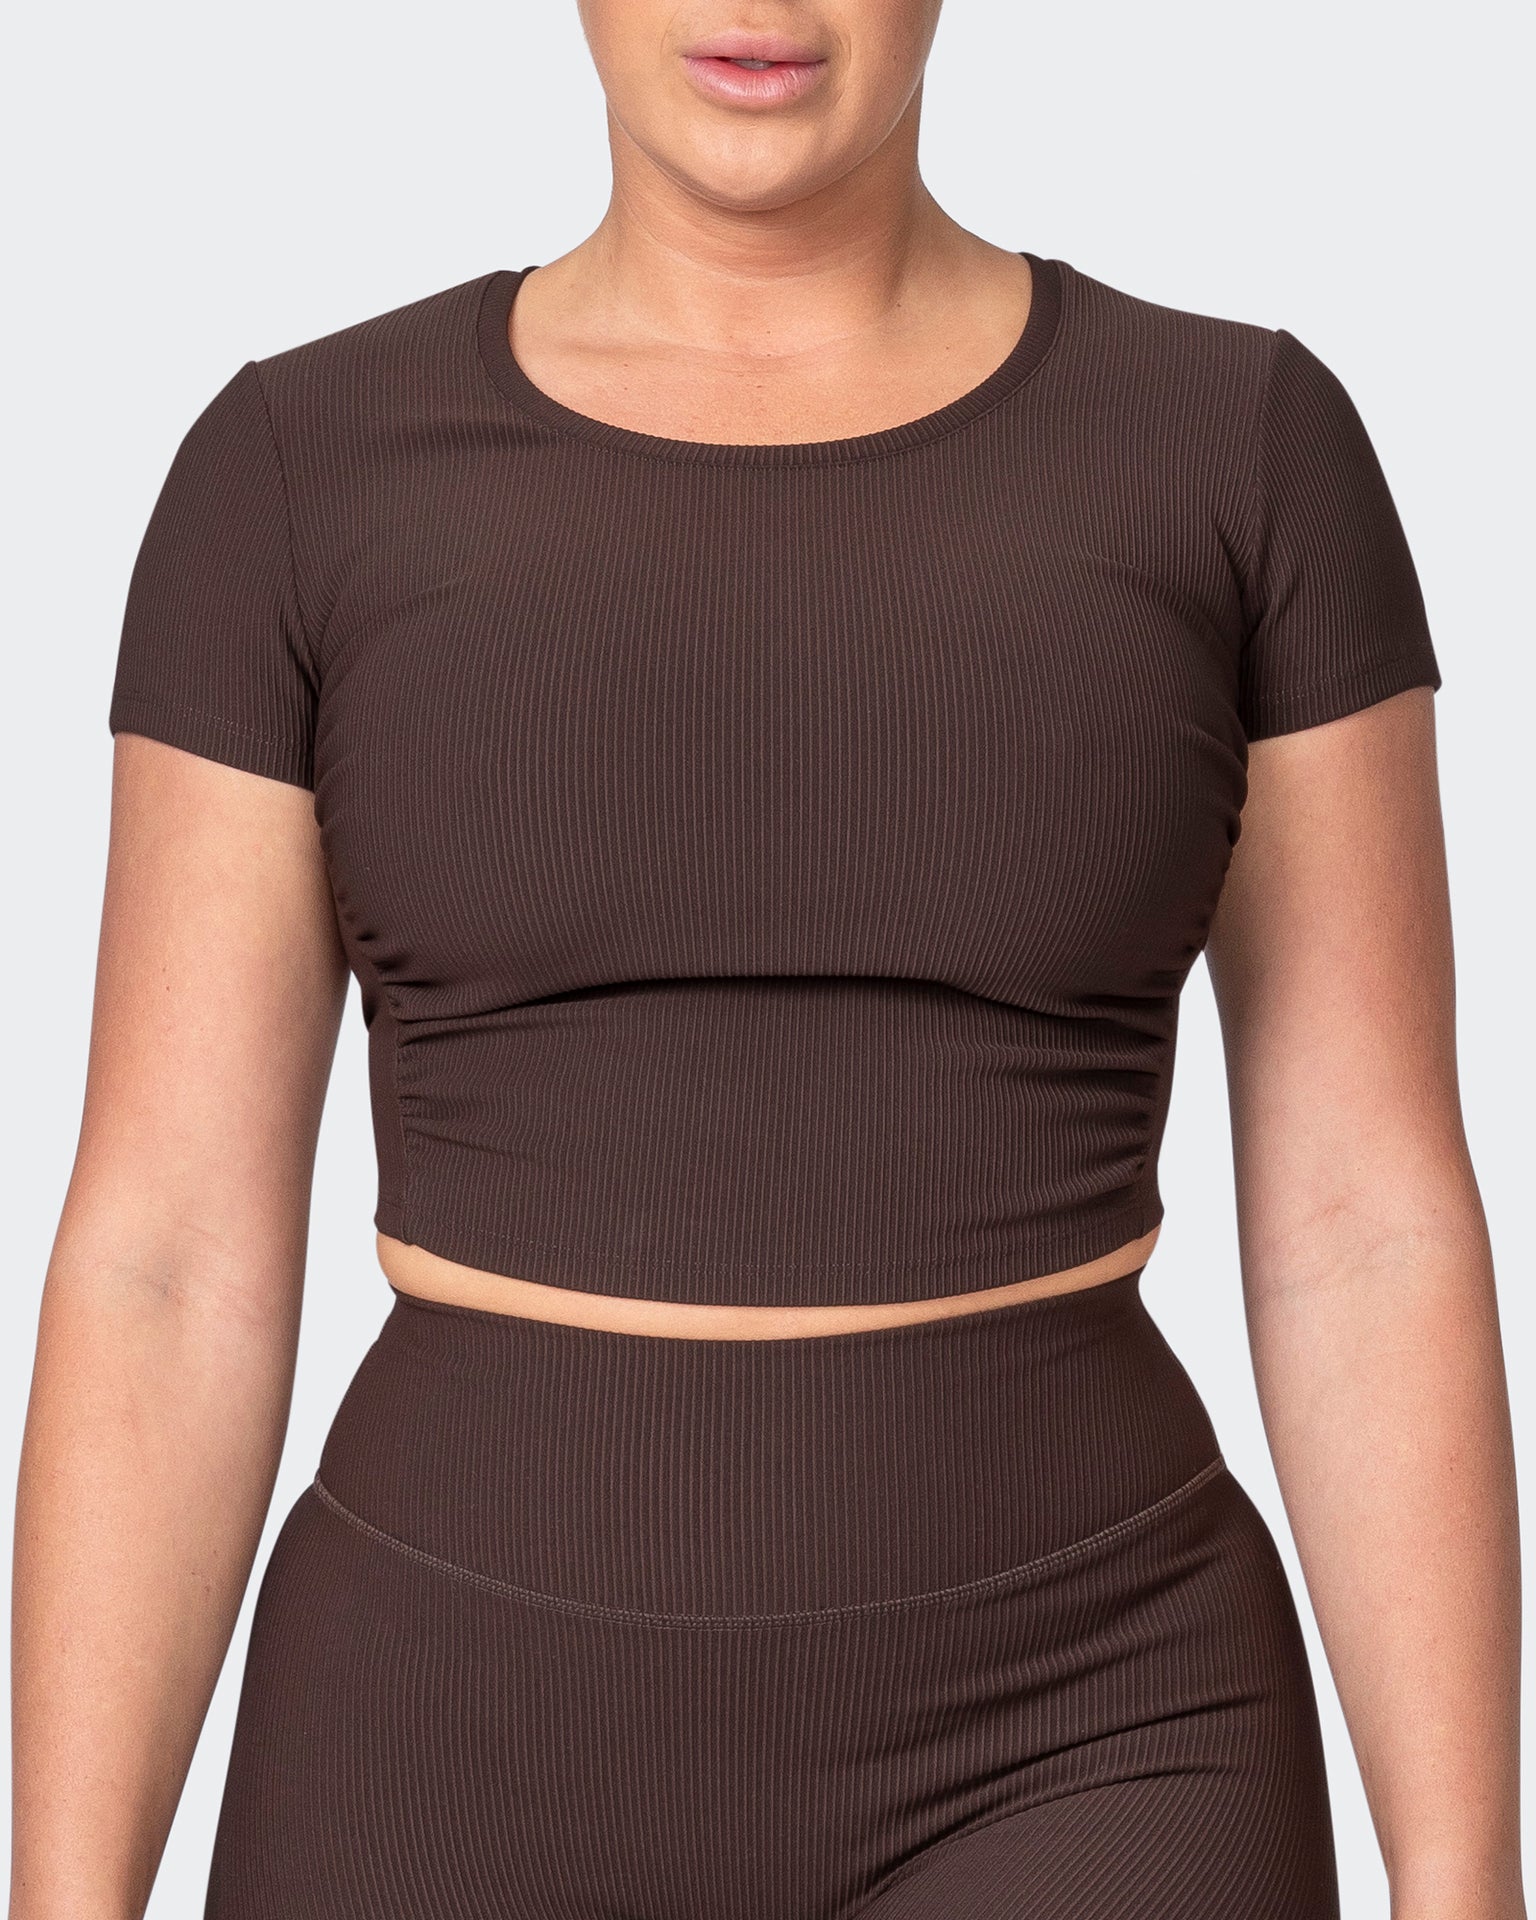 musclenation T-Shirts Rival Cropped Rib Top - Cocoa